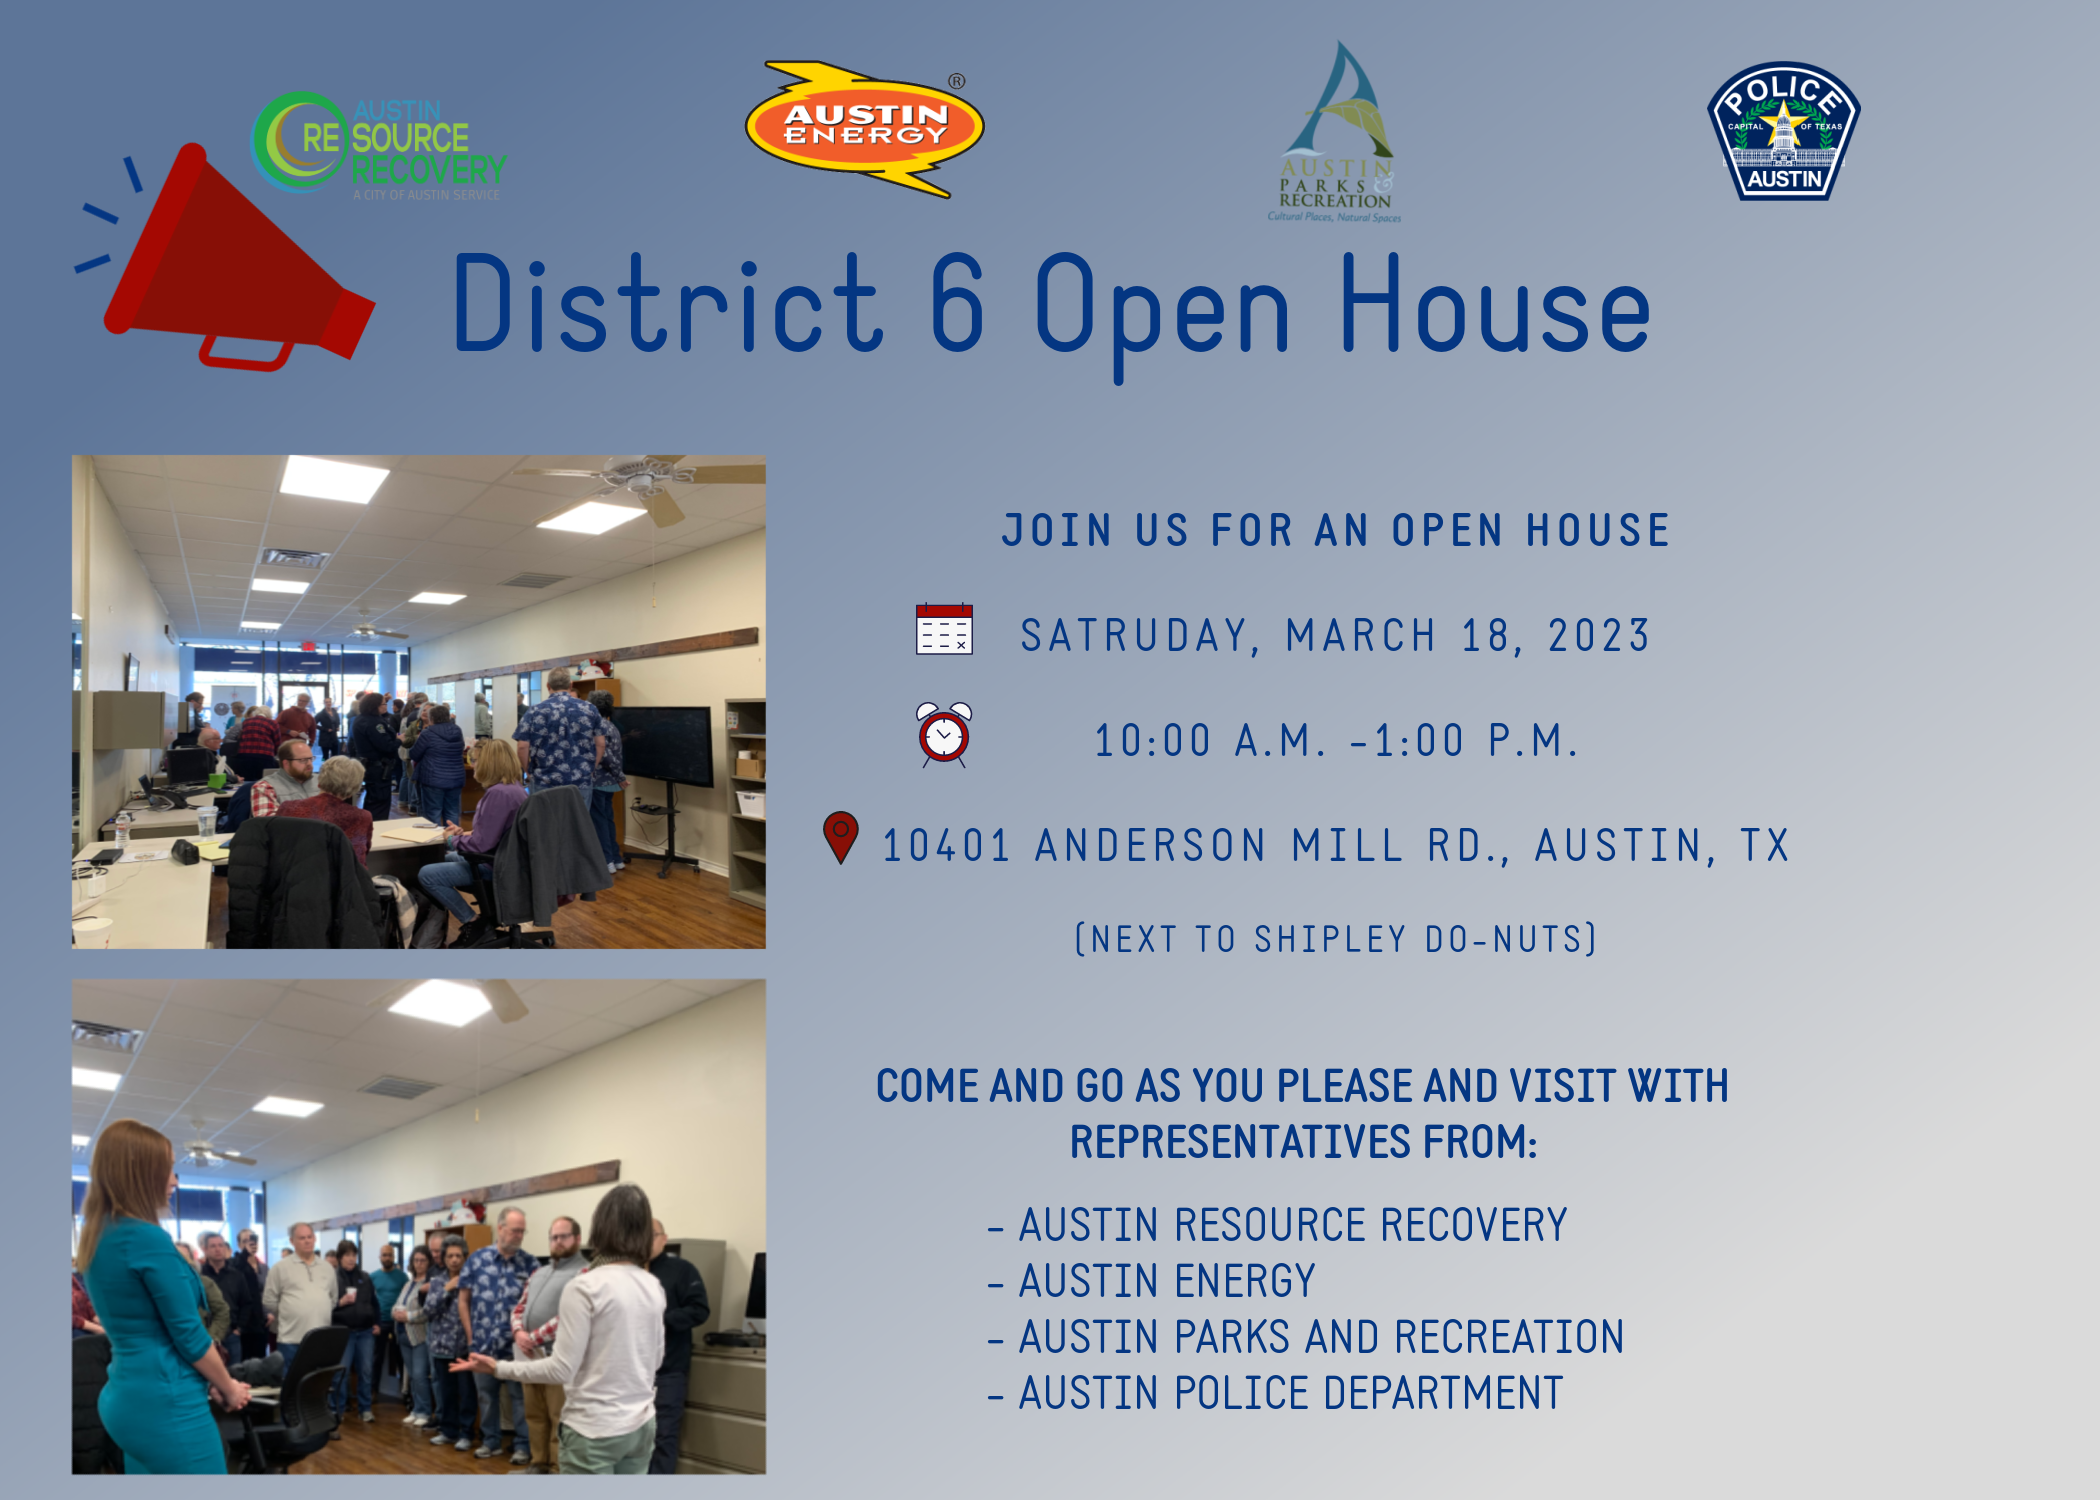 District 6 Open House